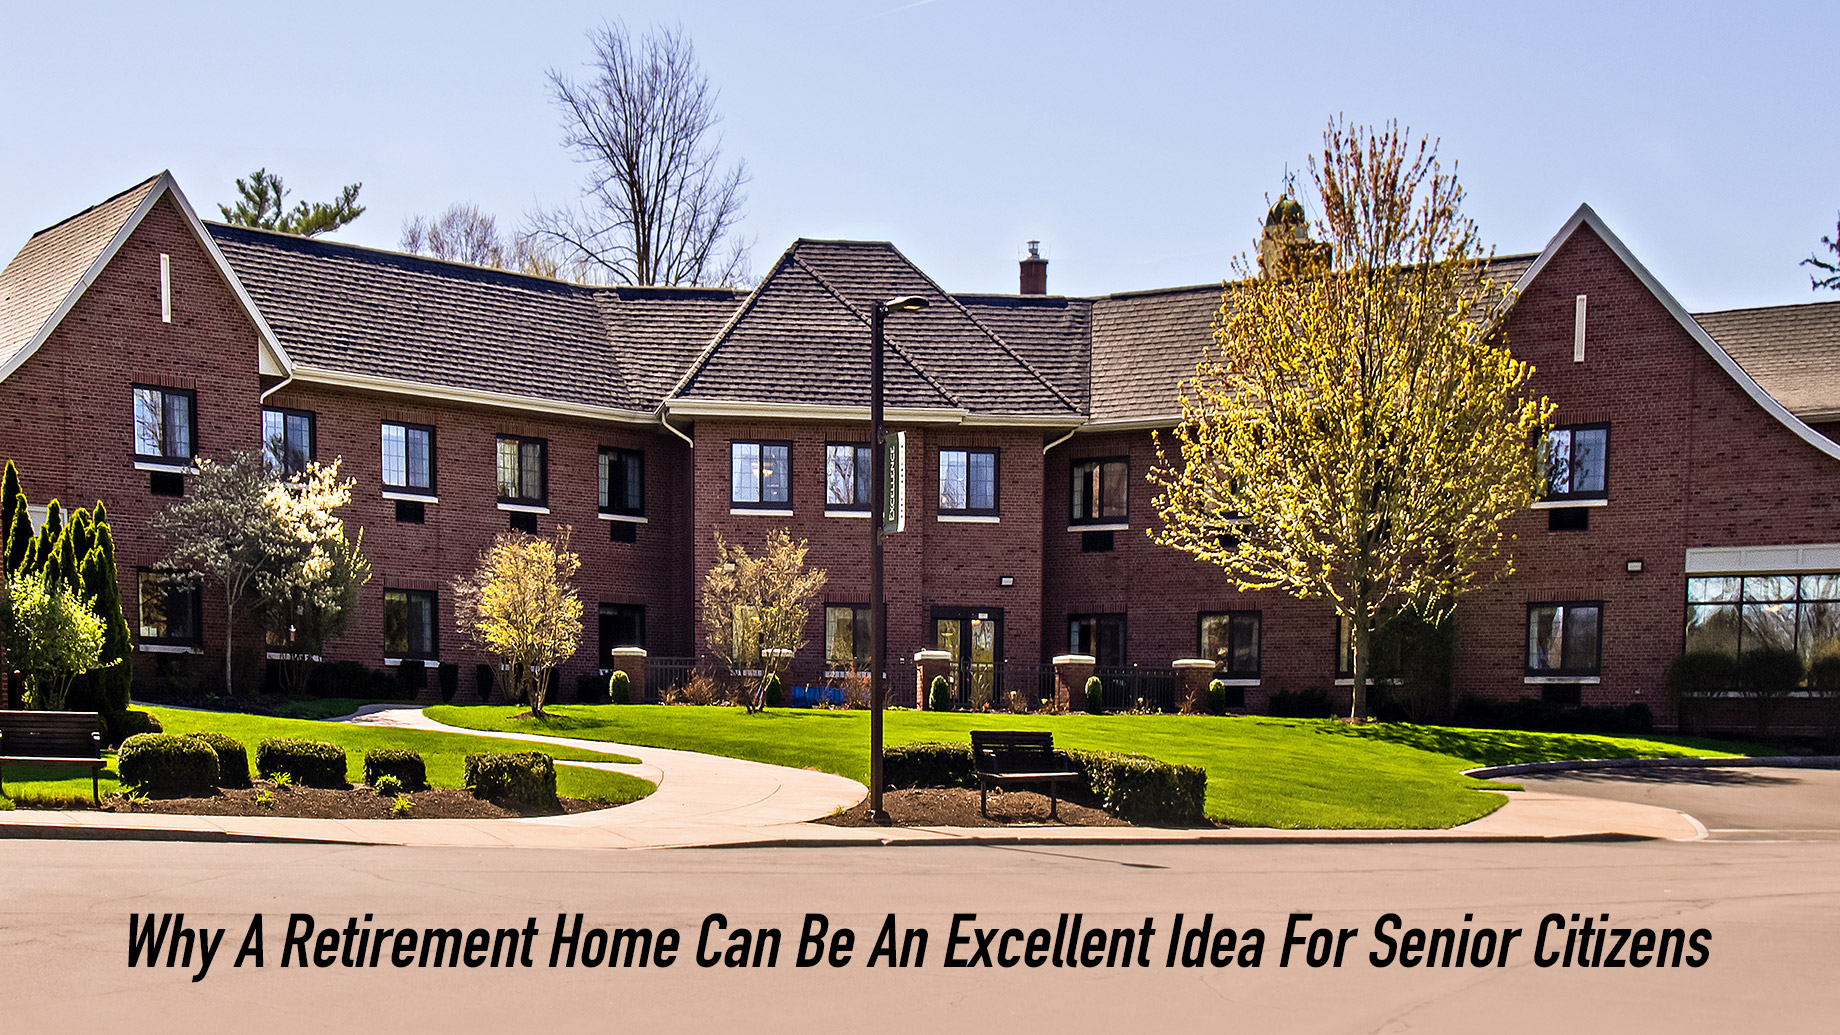 Why A Retirement Home Can Be An Excellent Idea For Senior Citizens